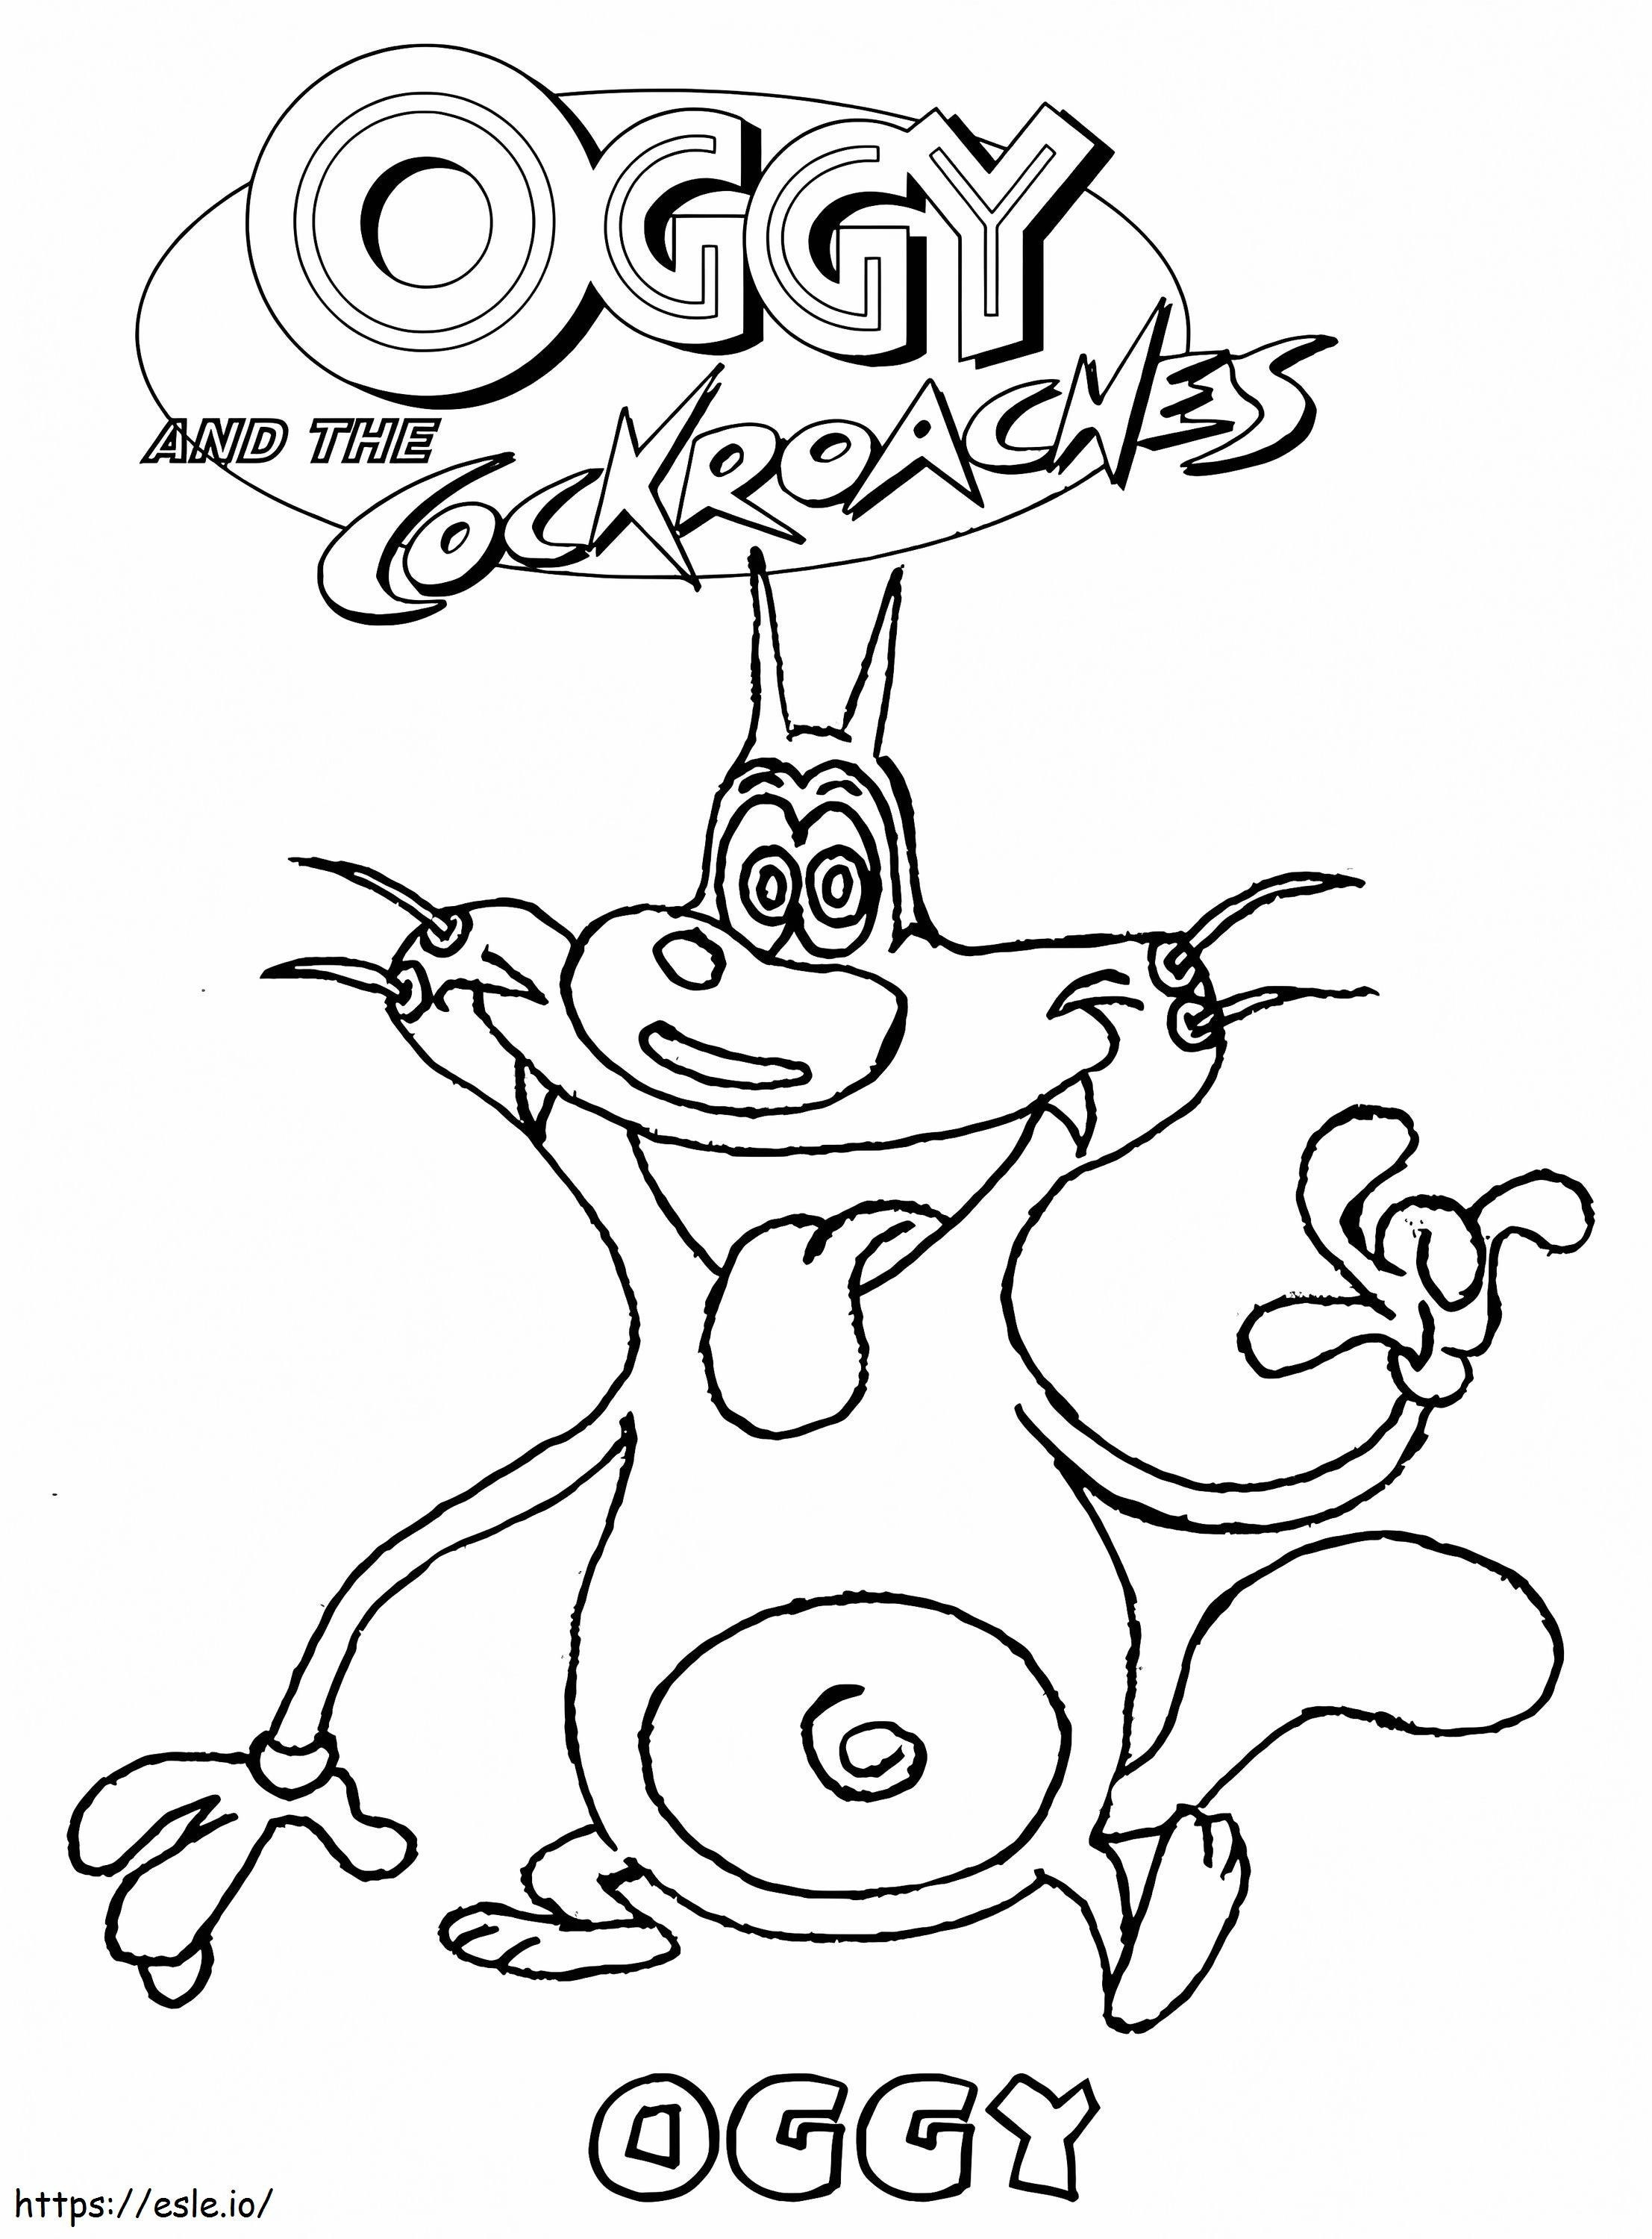 Oggy Cockroaches 1801844561 coloring page